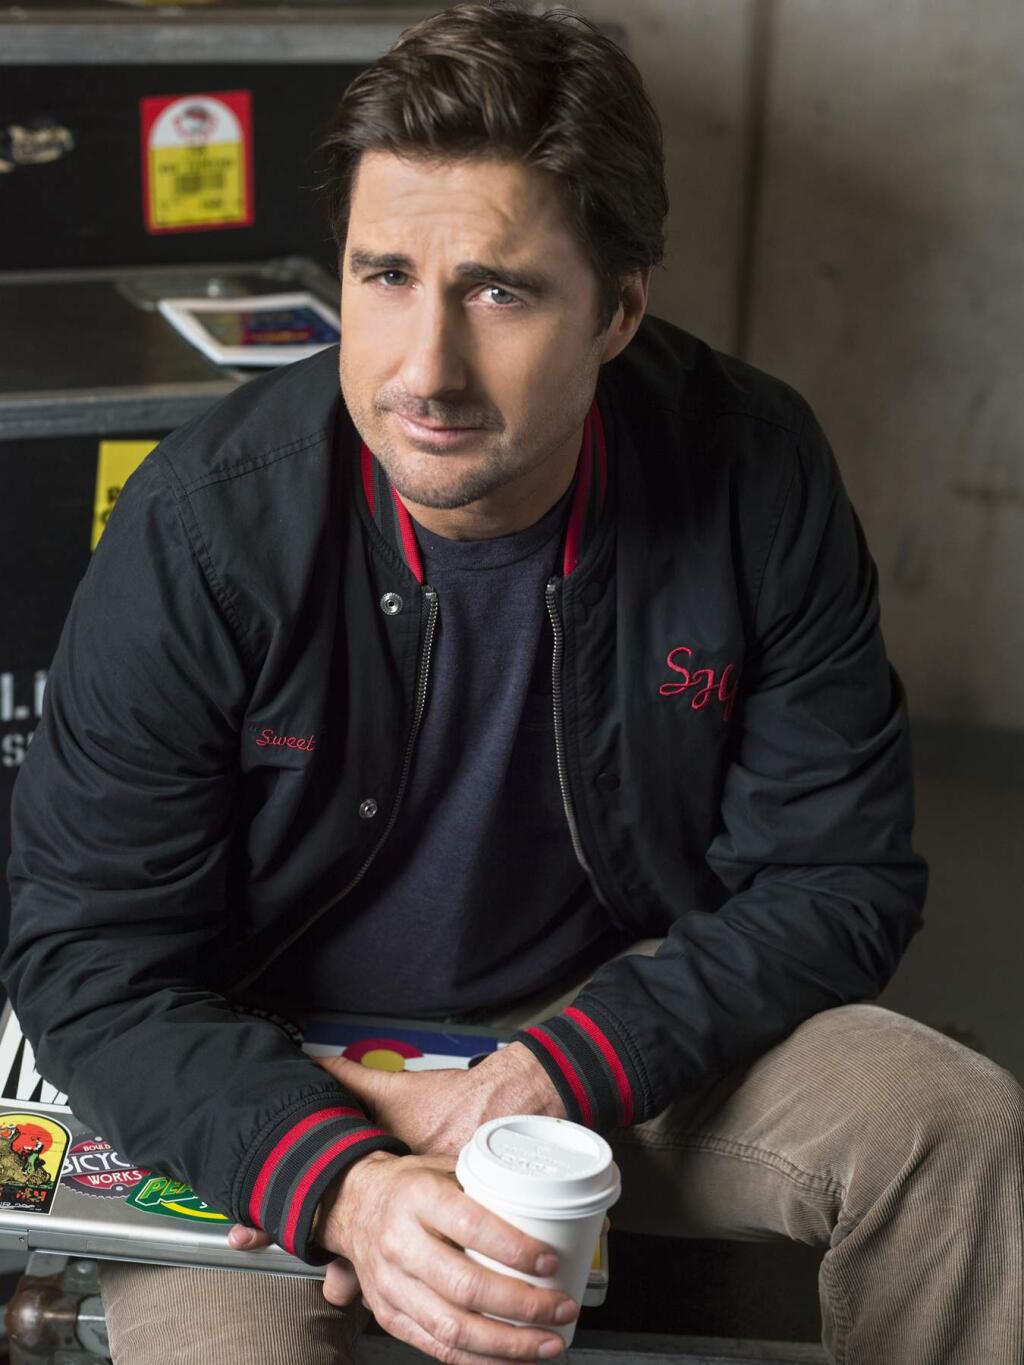 Actor Luke Wilson will drive the pace car to kick off the Toyota/Save Mart 350 NASCAR Sprint Cup Series race at Sonoma Raceway on Sunday, June 26. he's shown here on the set of his new Showtime TV series 'Roadies.' (Mark Seliger/Showtime)